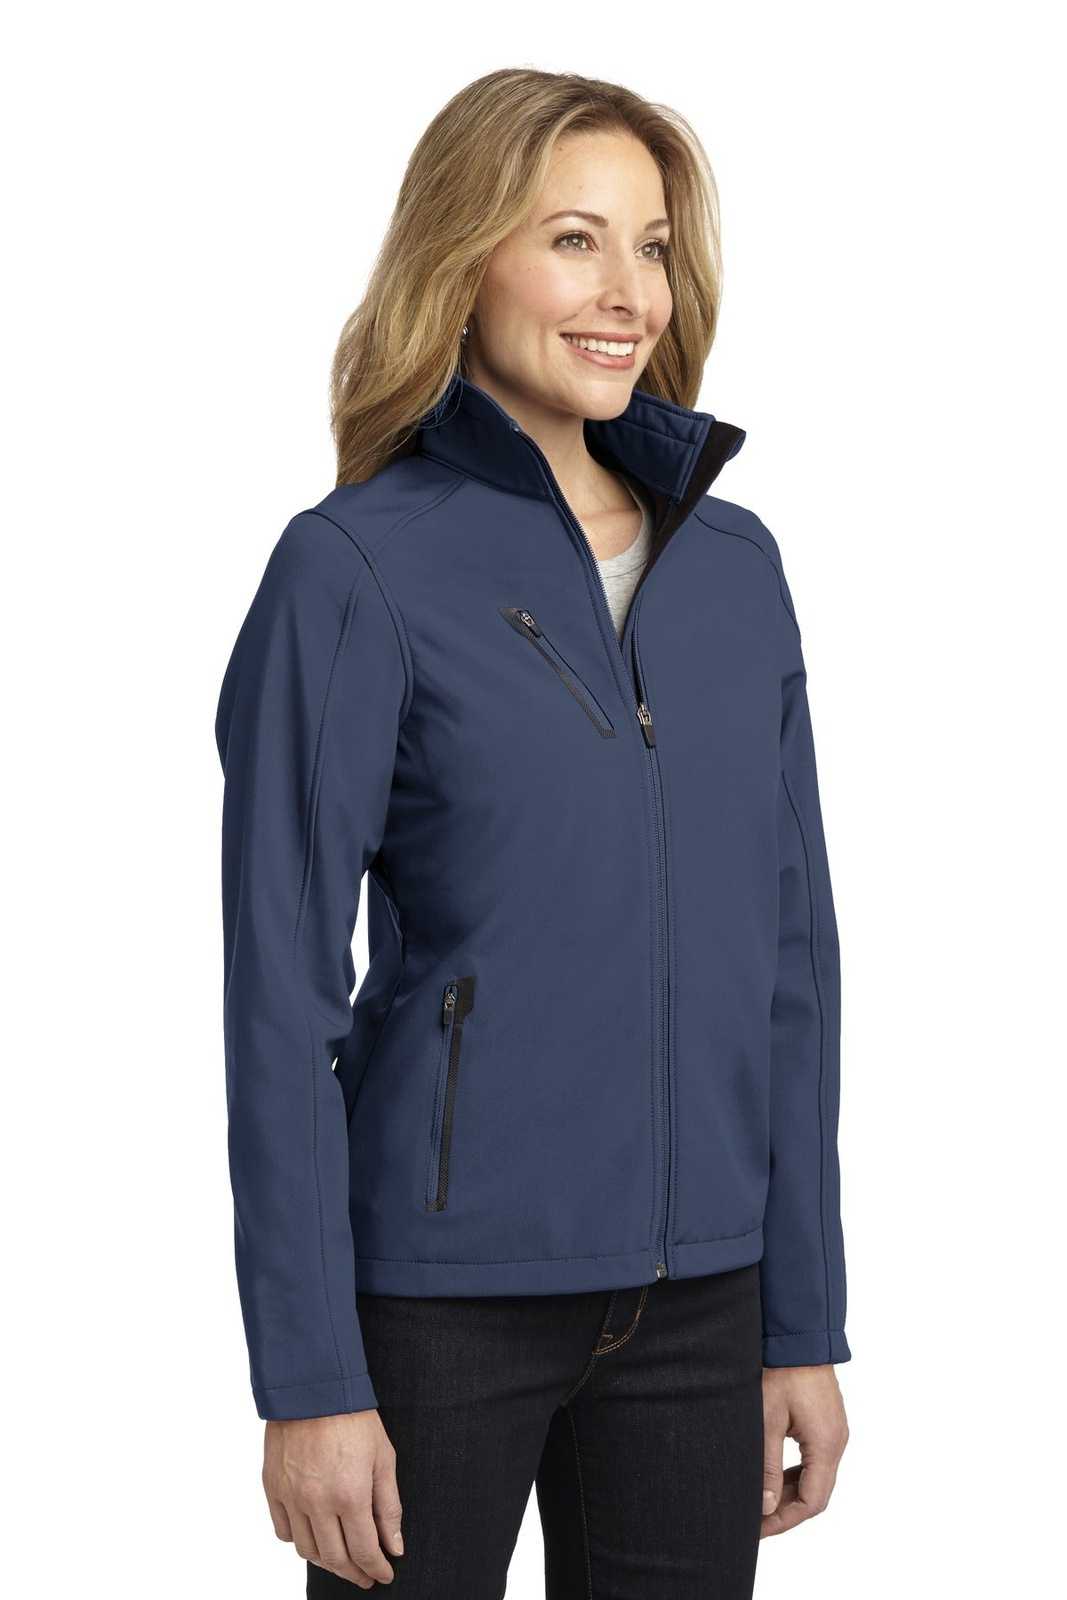 Port Authority L324 Ladies Welded Soft Shell Jacket - Dress Blue Navy - HIT a Double - 4